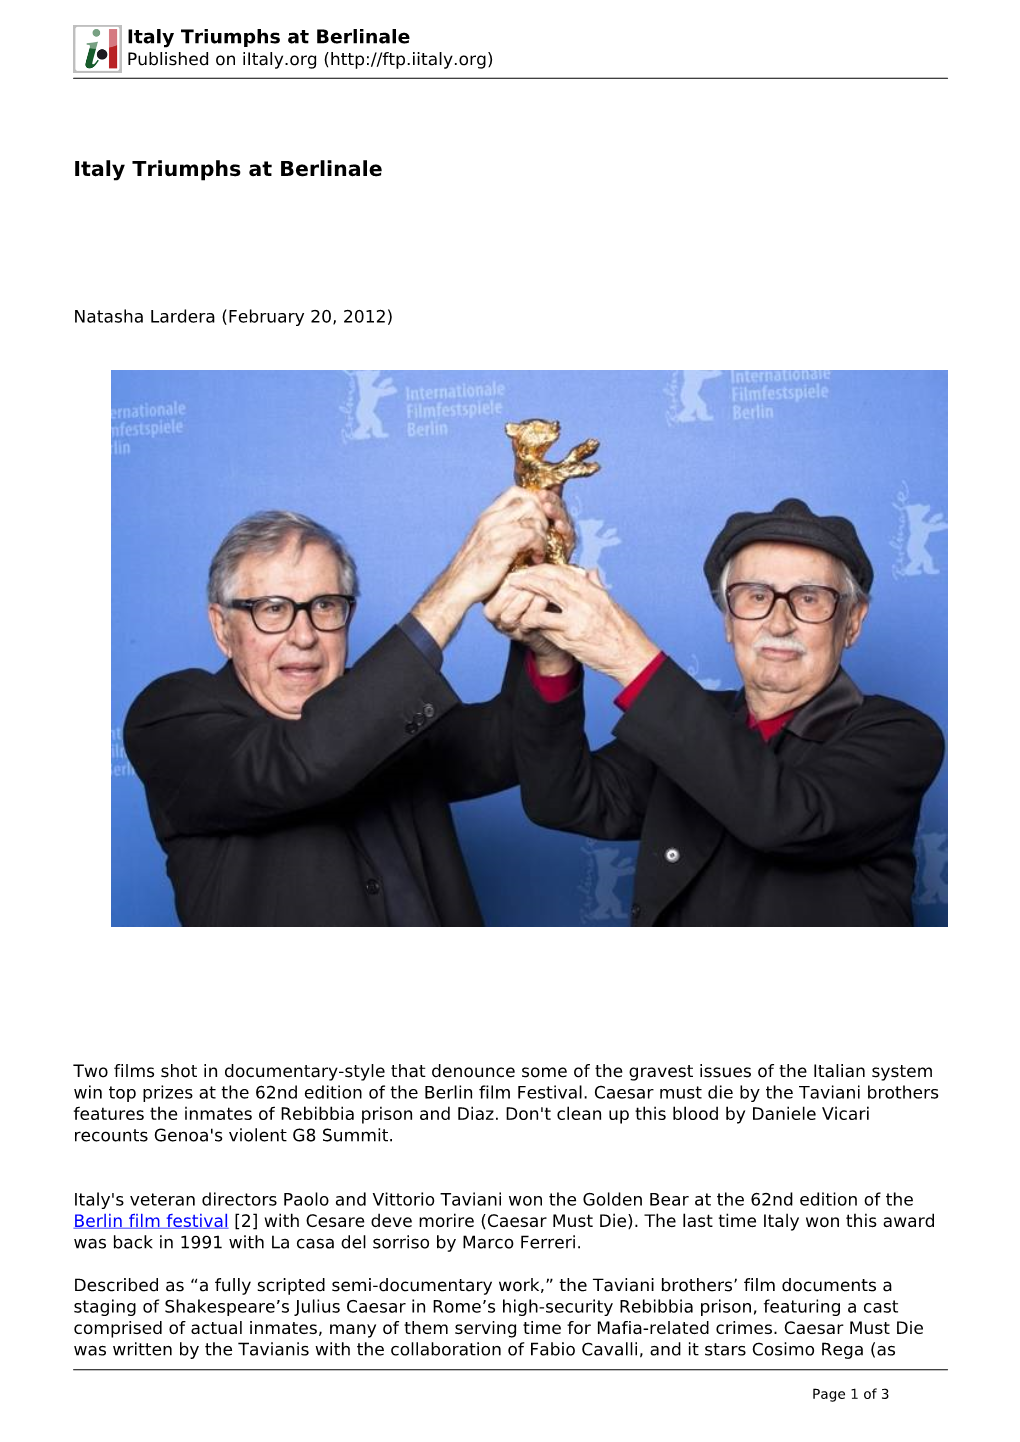 Italy Triumphs at Berlinale Published on Iitaly.Org (